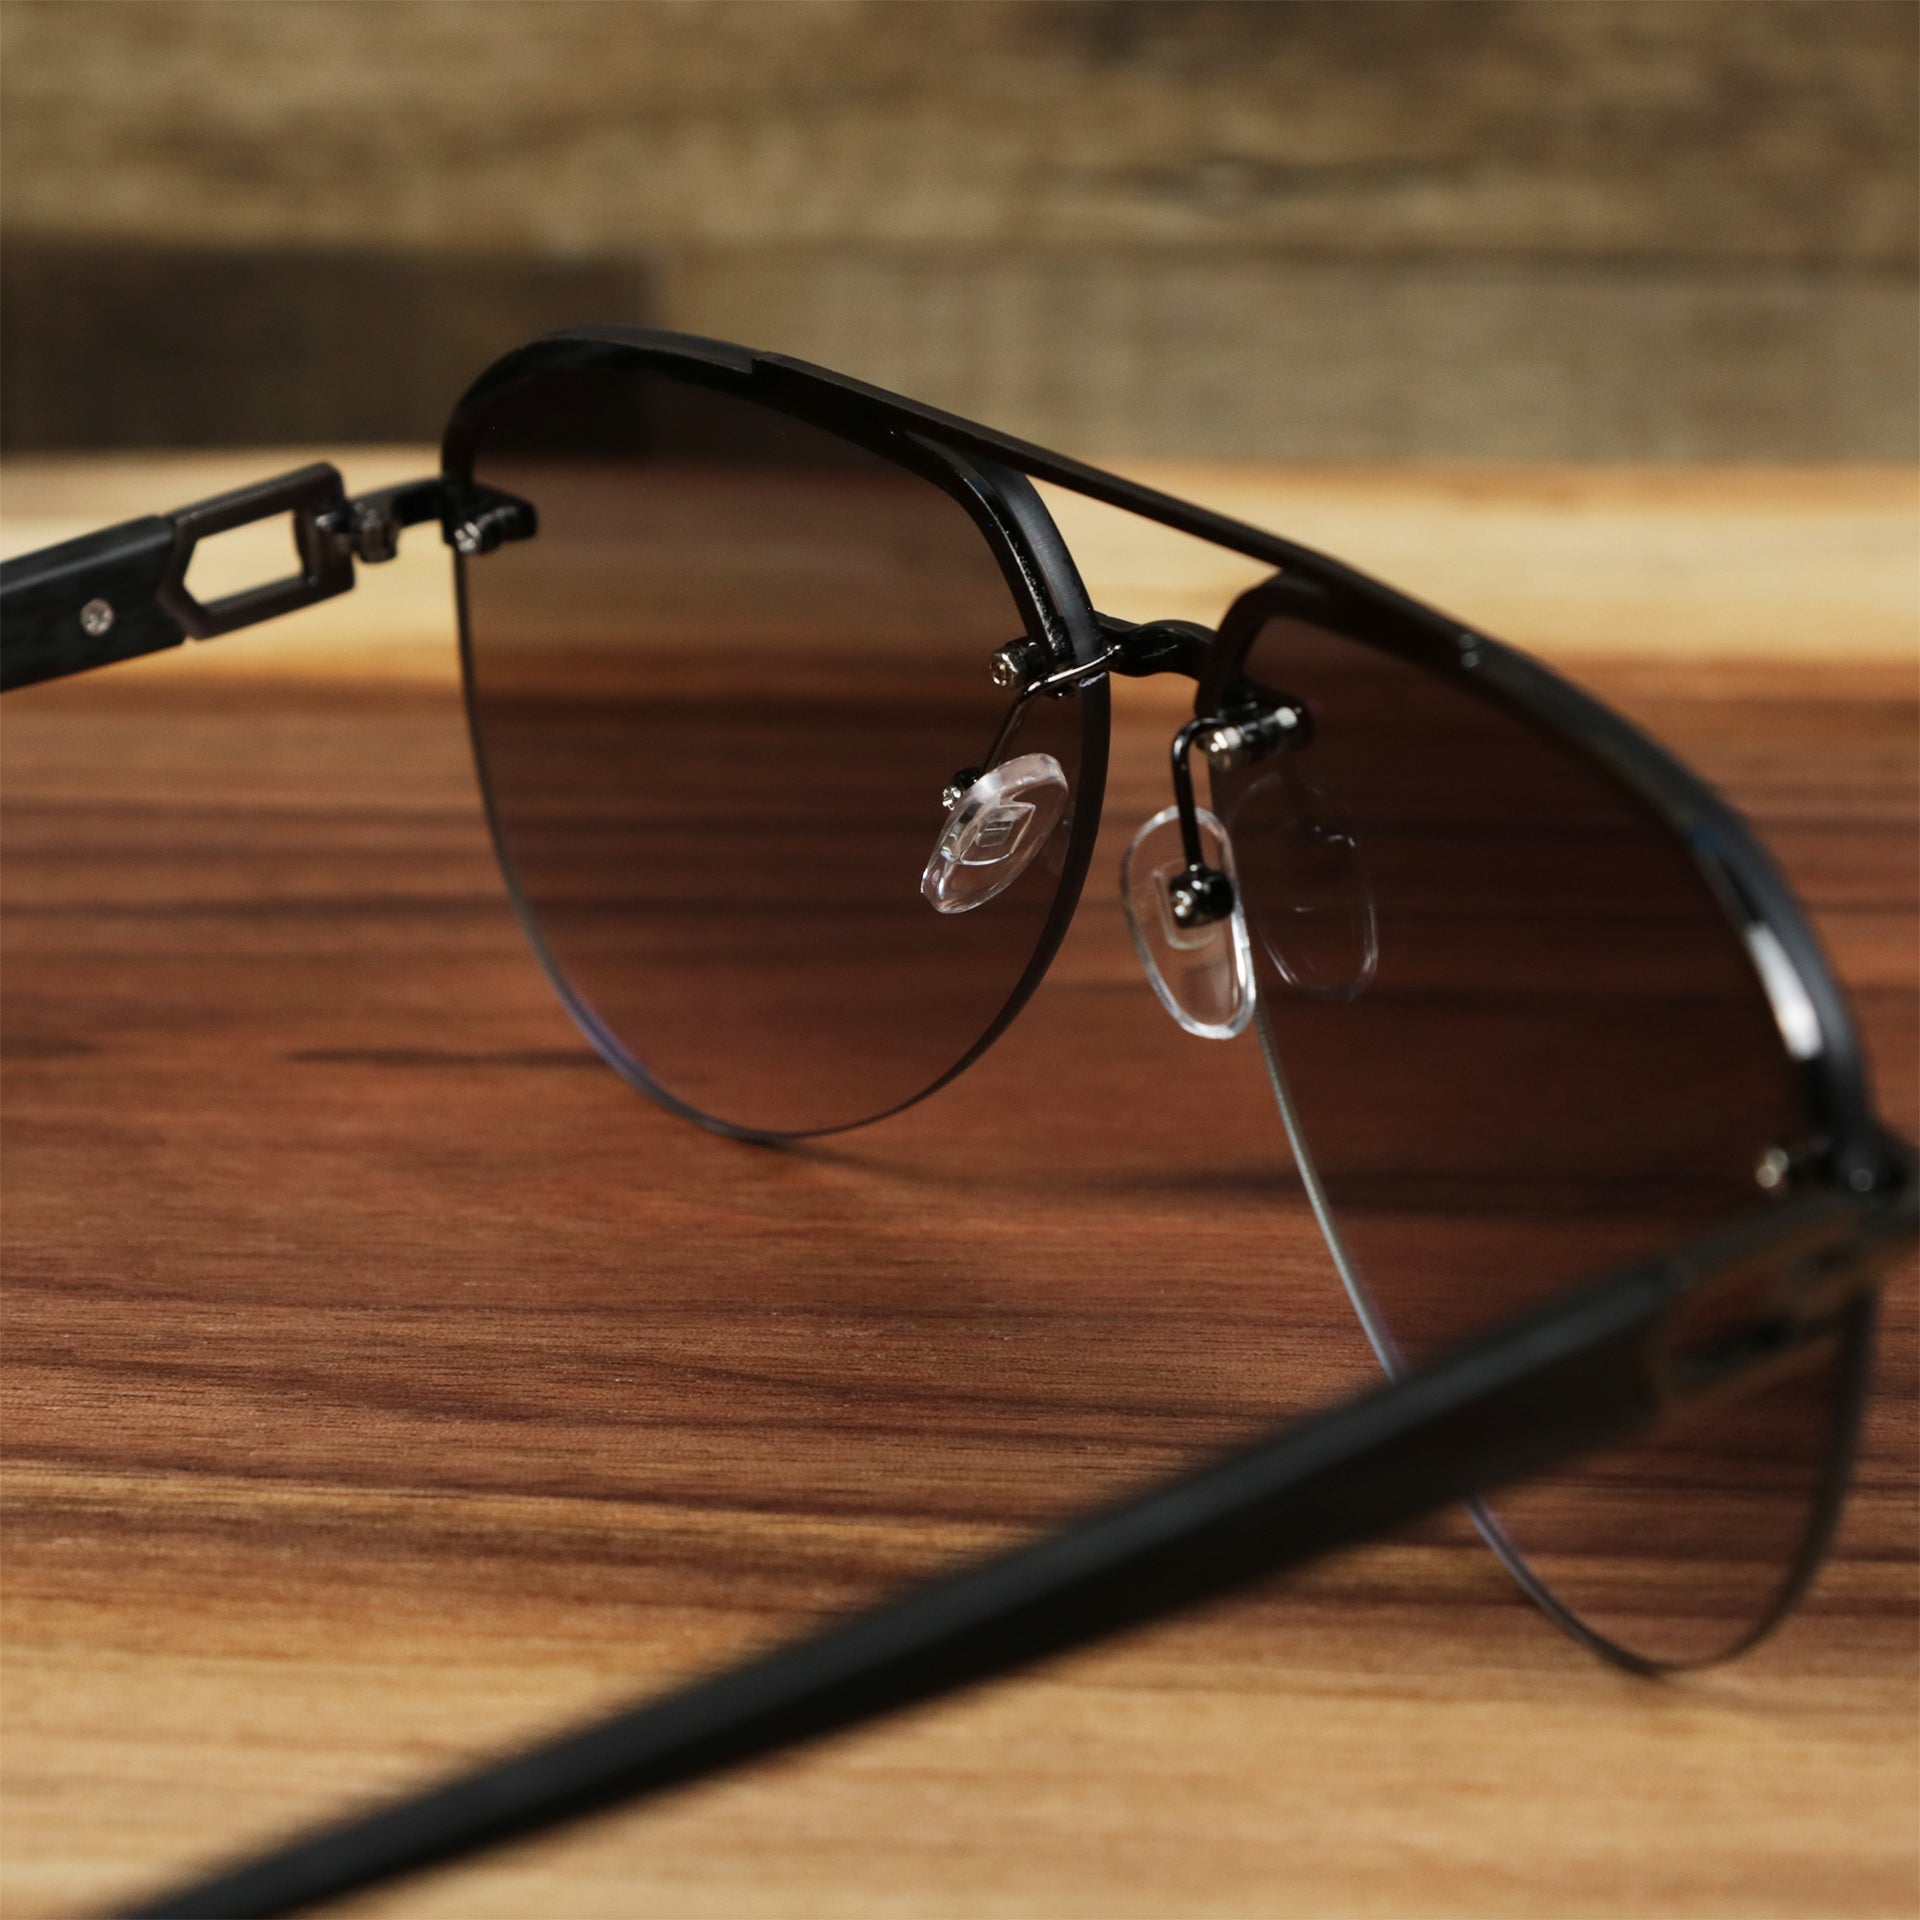 The inside of the Round Aviator Frames Black Lens Sunglasses with Gold Frame